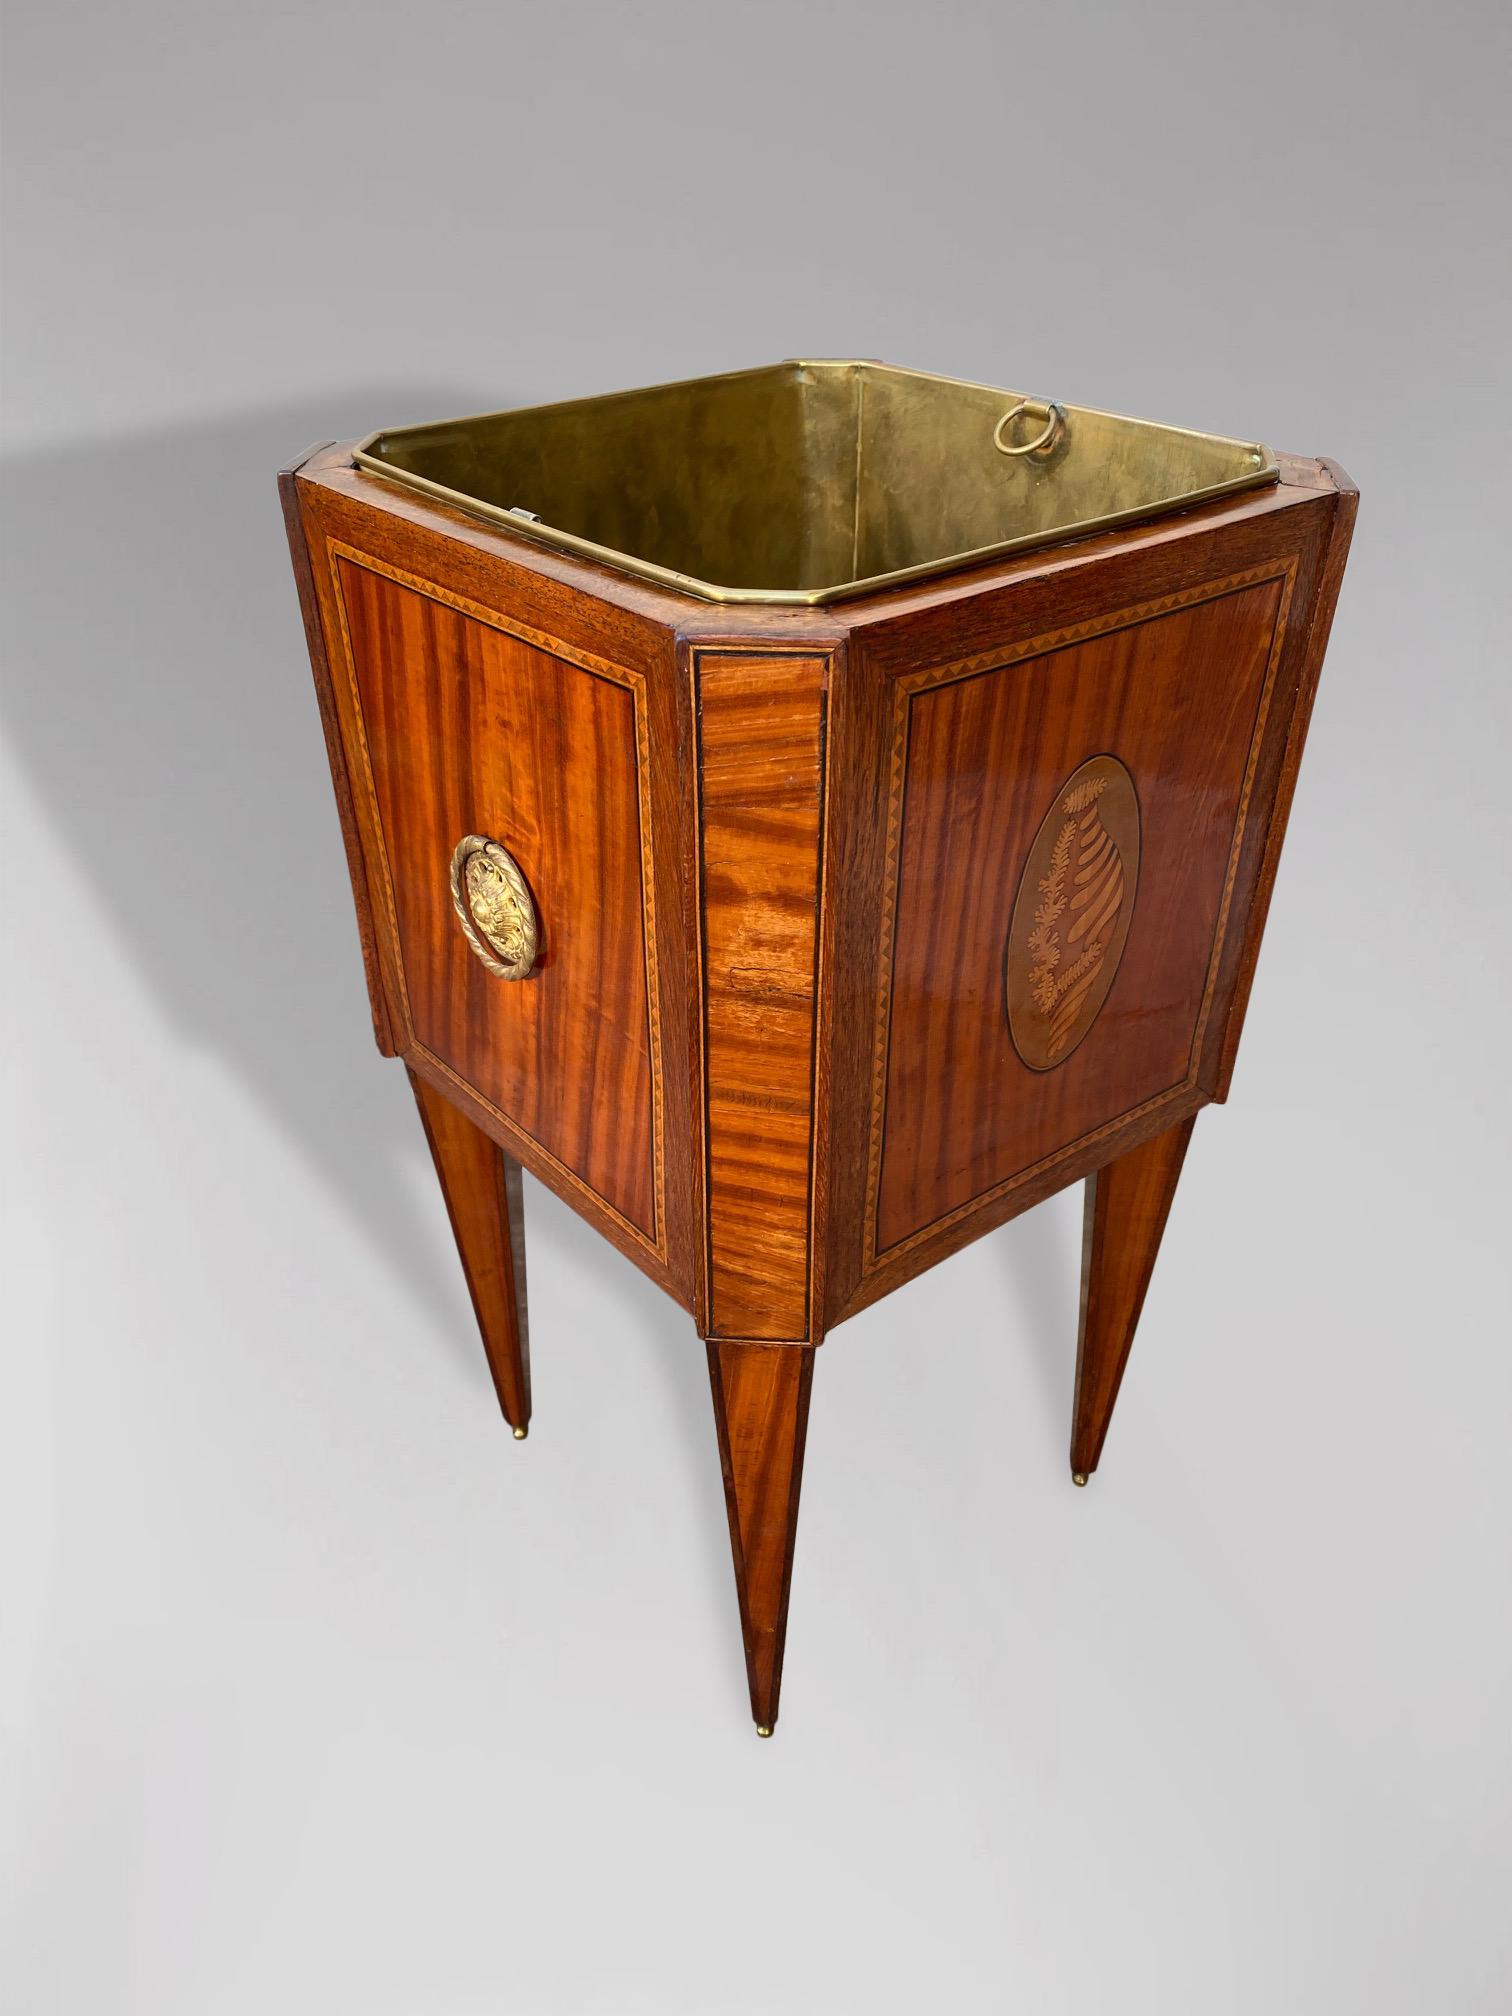 Brass 20th Century Edwardian Period Mahogany and Marquetry Jardinière